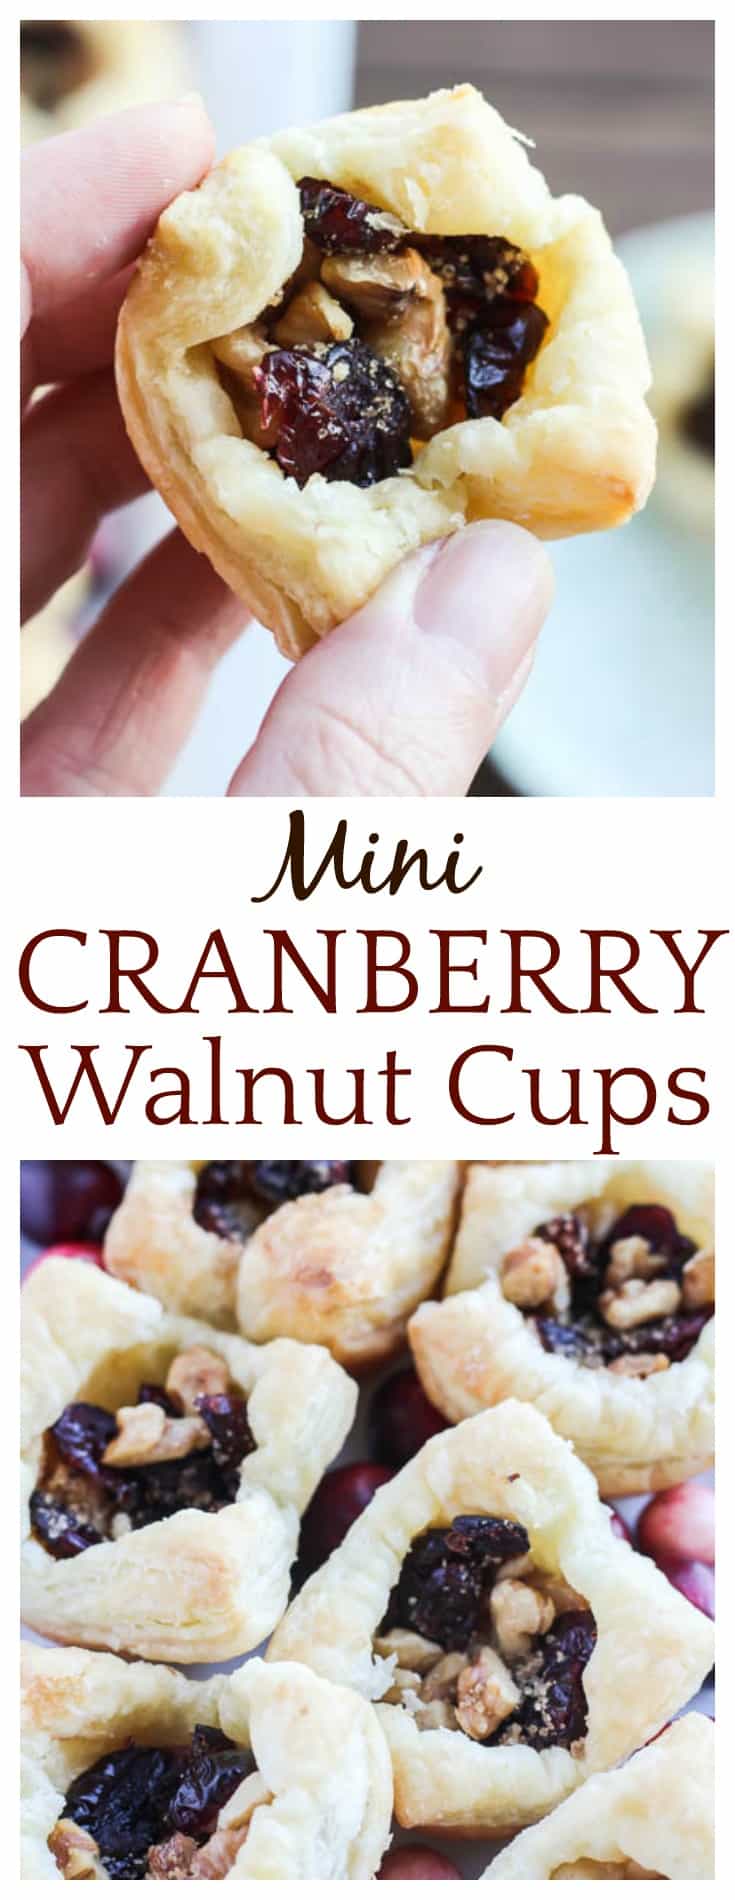  These Mini Cranberry Walnut Cups make a delicious appetizer or treat for the holidays! Made with Puff Pastry Sheets, sugar, and spice, they are sure to delight! #ad #InspiredByPuff #appetizers #holidayrecipes #DLBrecipes